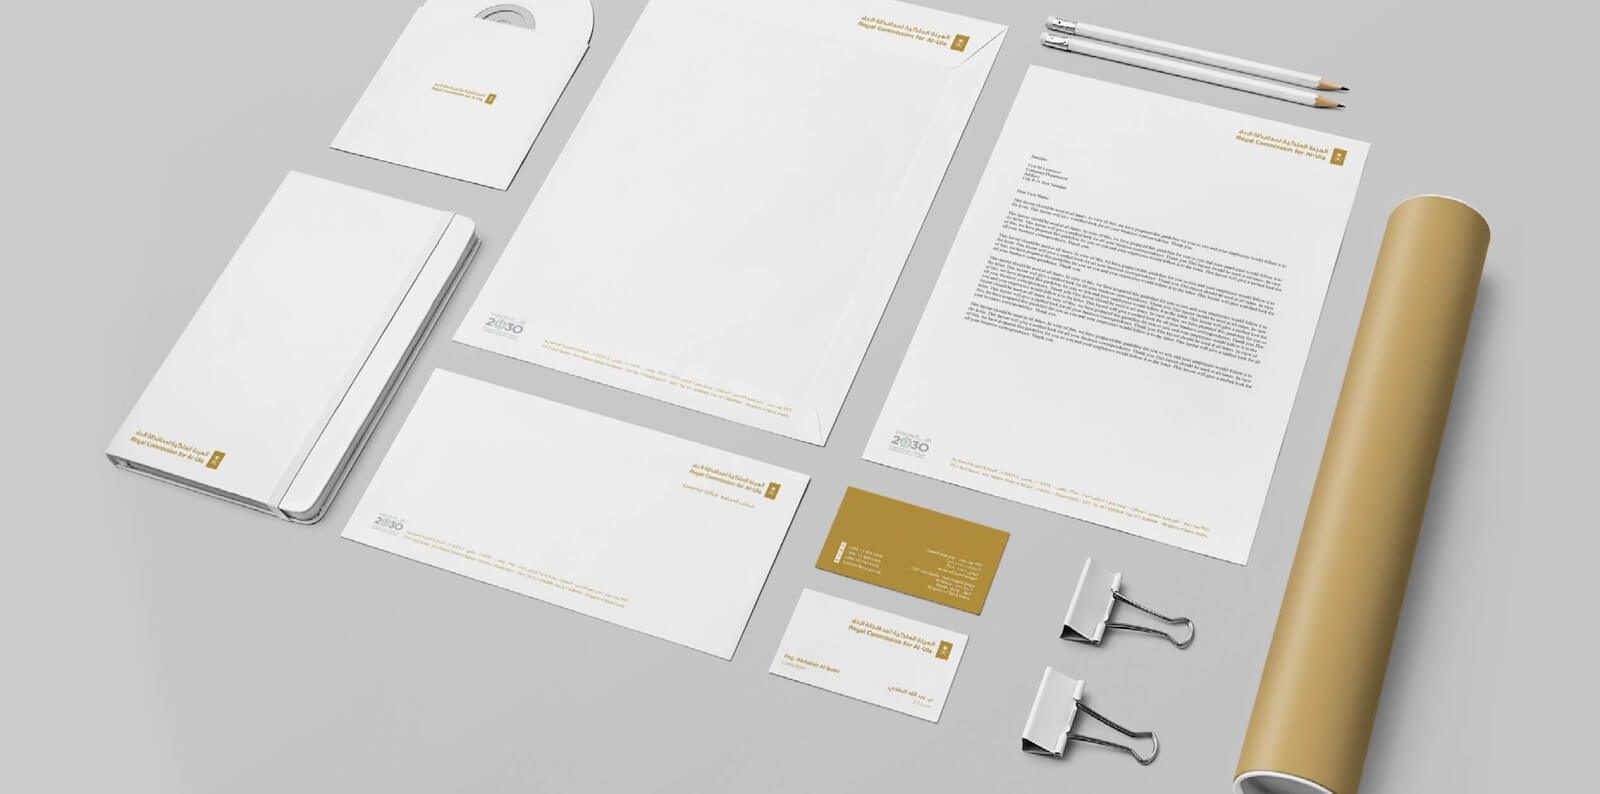 How To Build The Best Brand Identity Design For Your Business